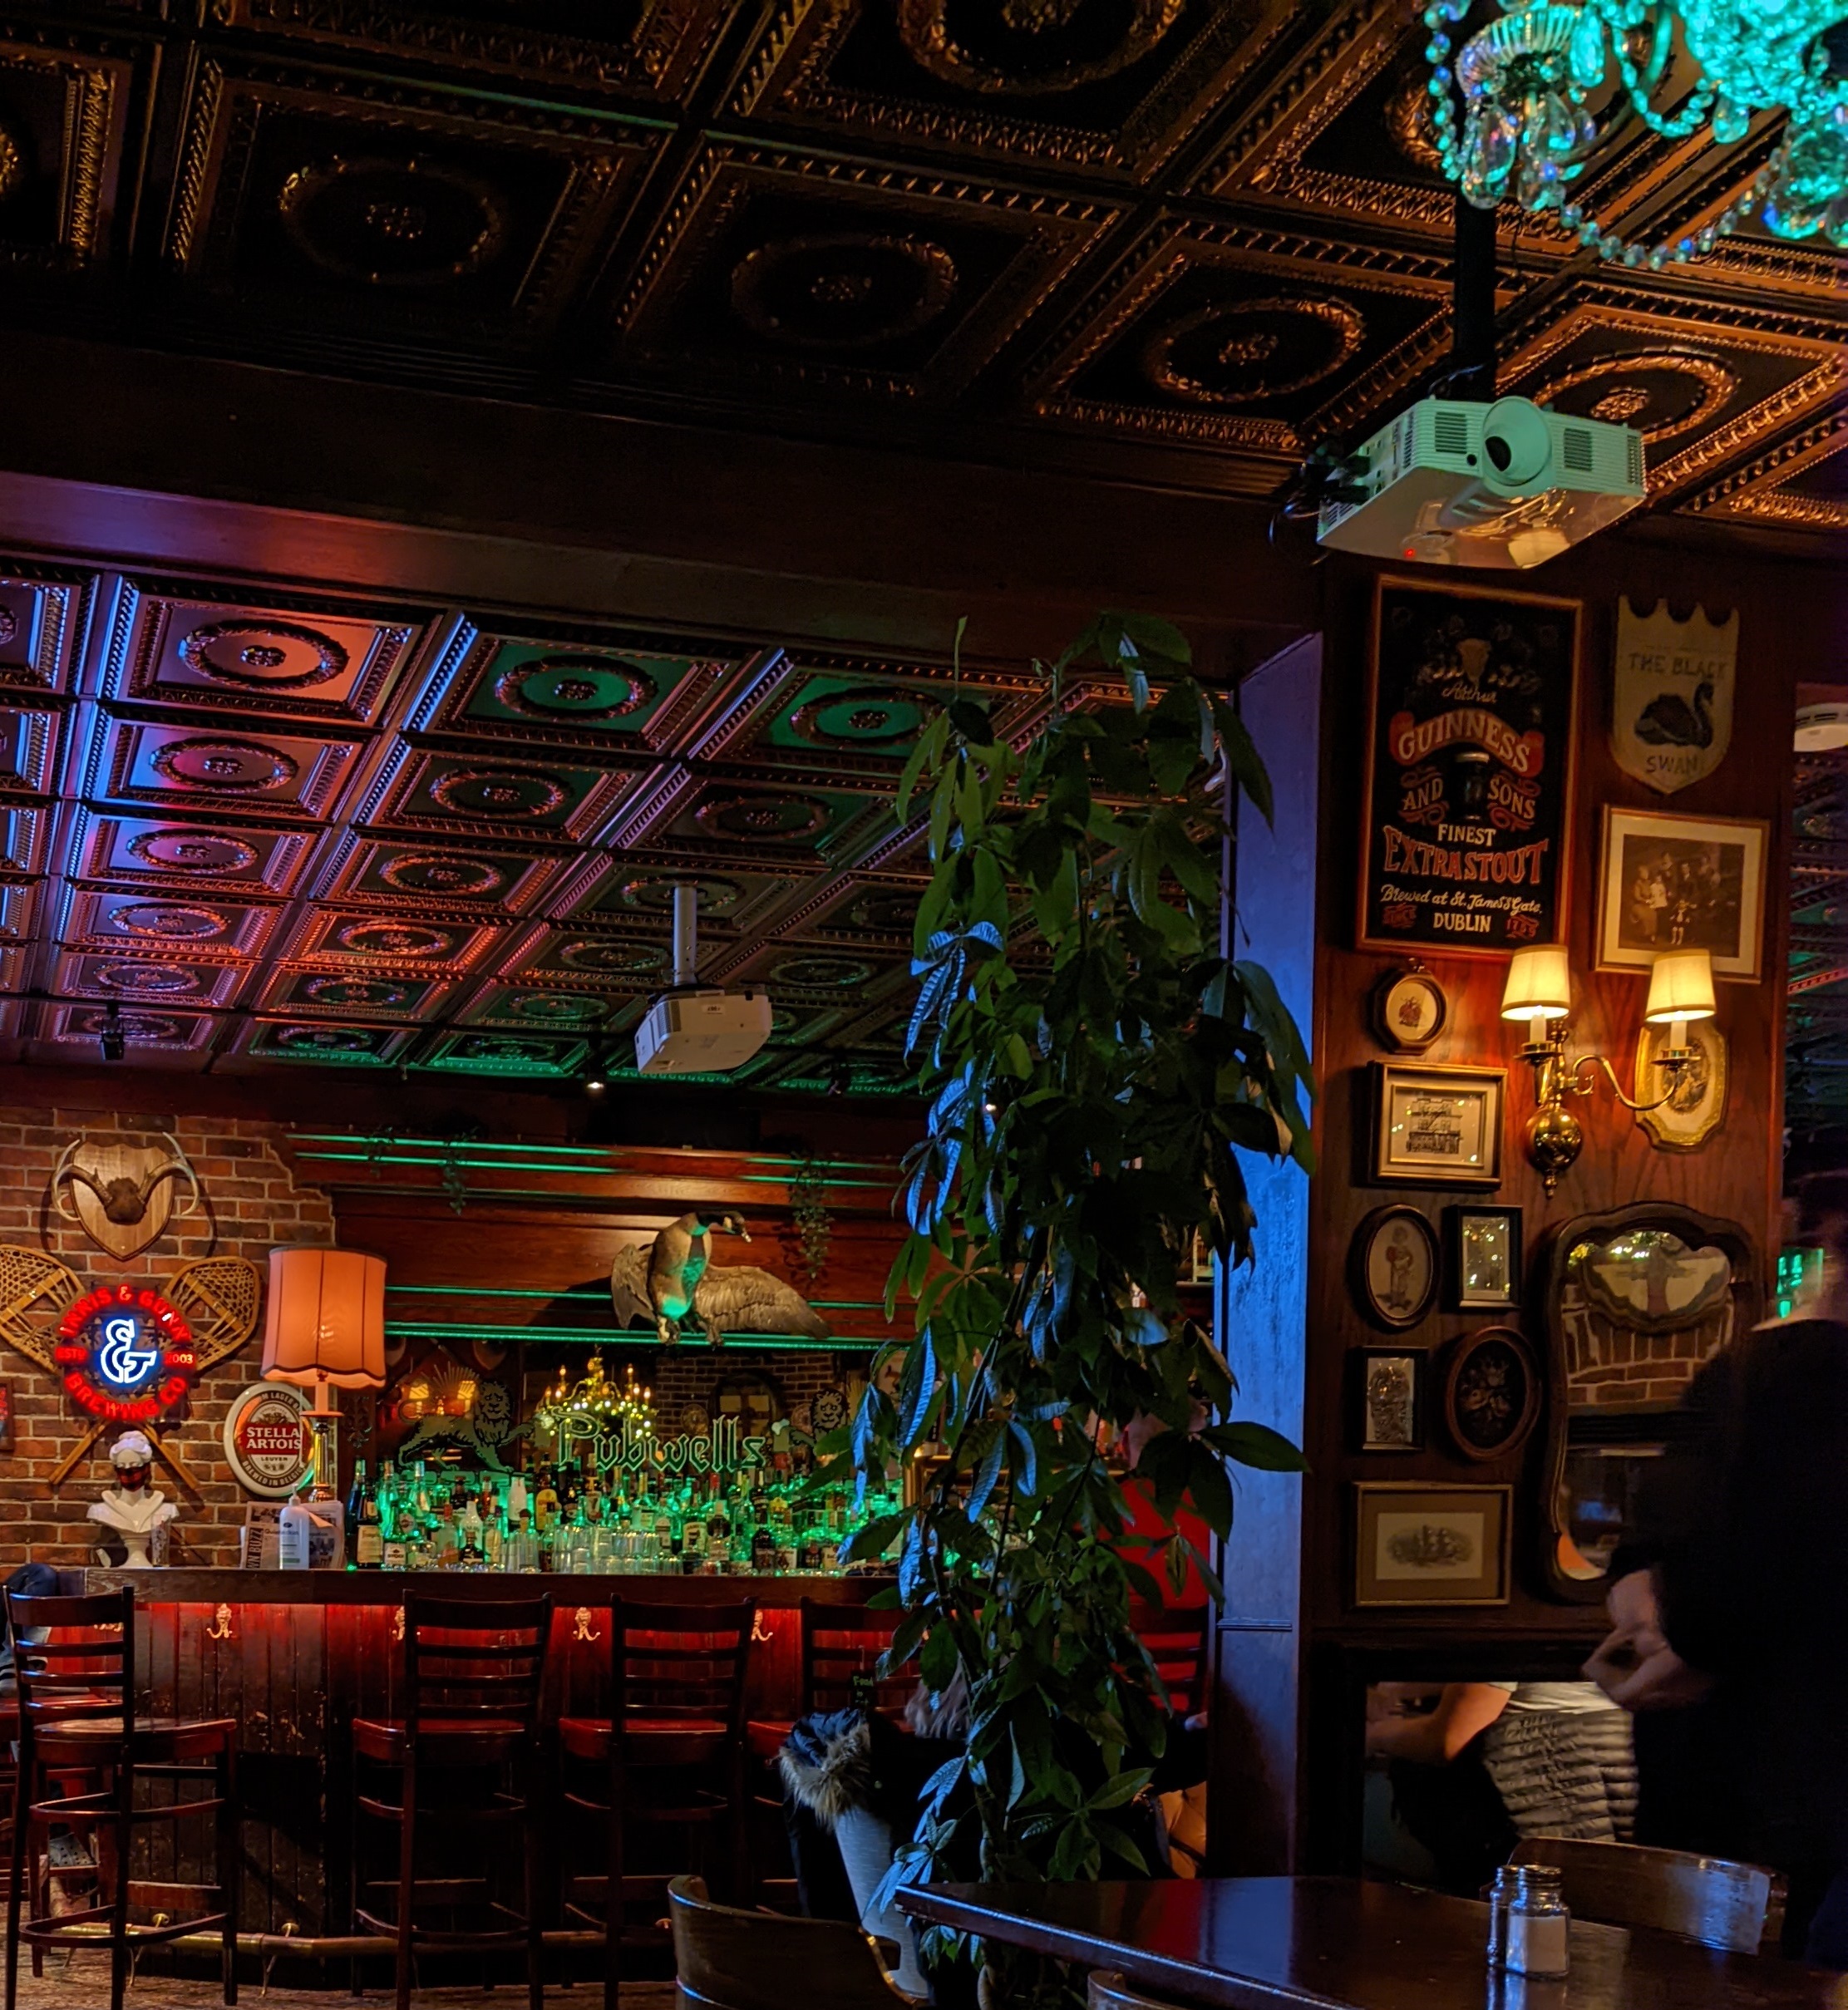 Evening shot of Pubwells' interior, with warm lighting reflecting off the nice tin ceiling